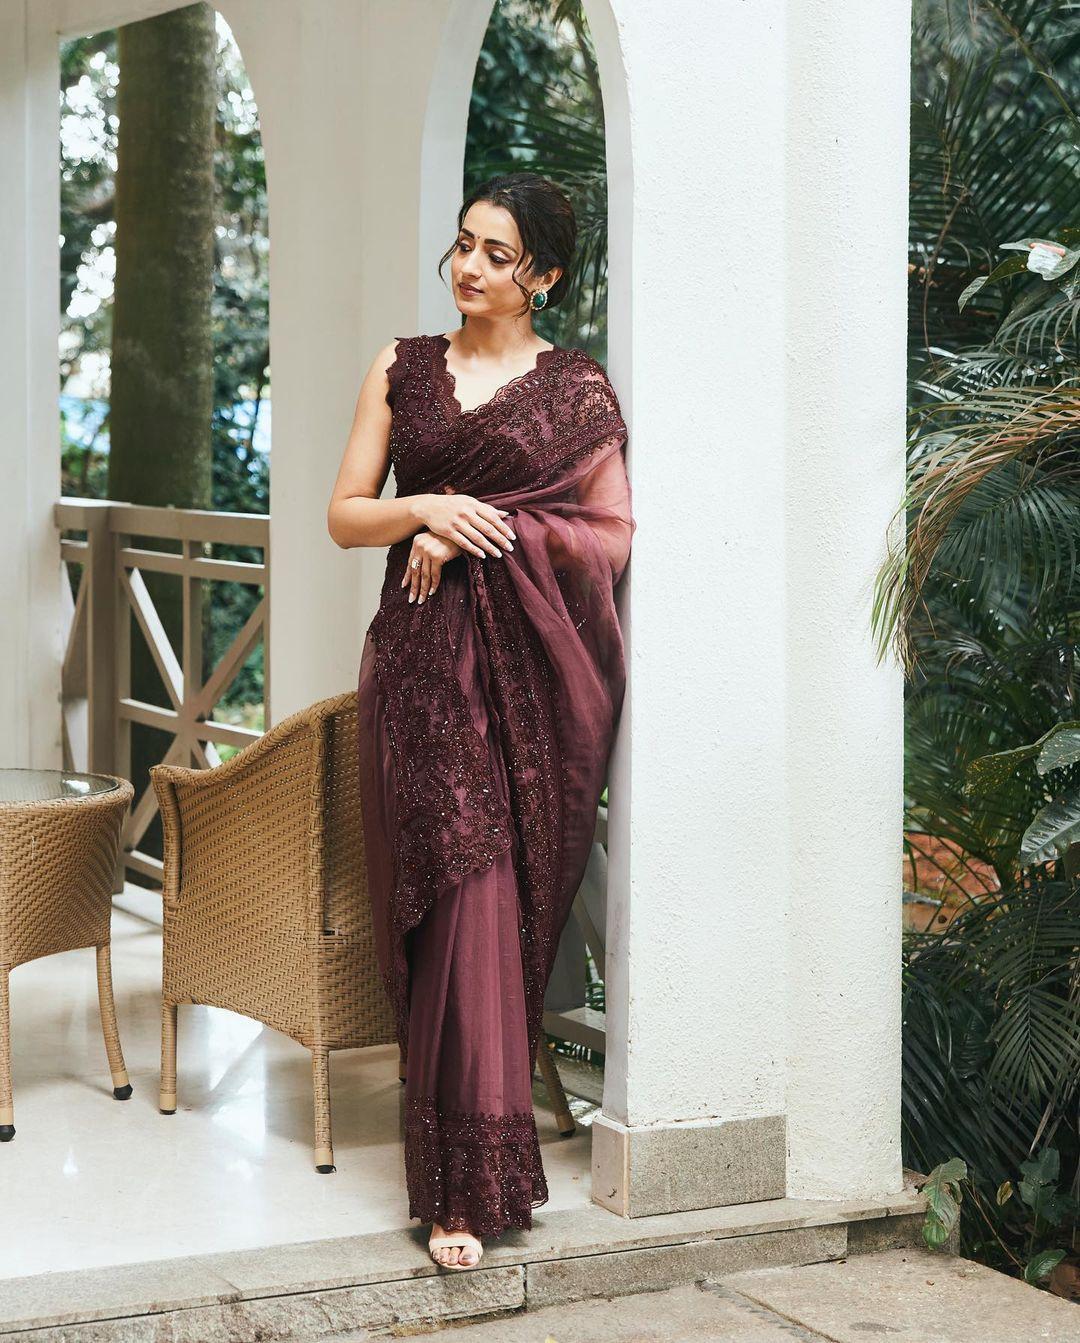 Trisha Krishnan's saree choices are just on point. Her collection gives us a range to pick our favourite based on the occasion we want to wear it for